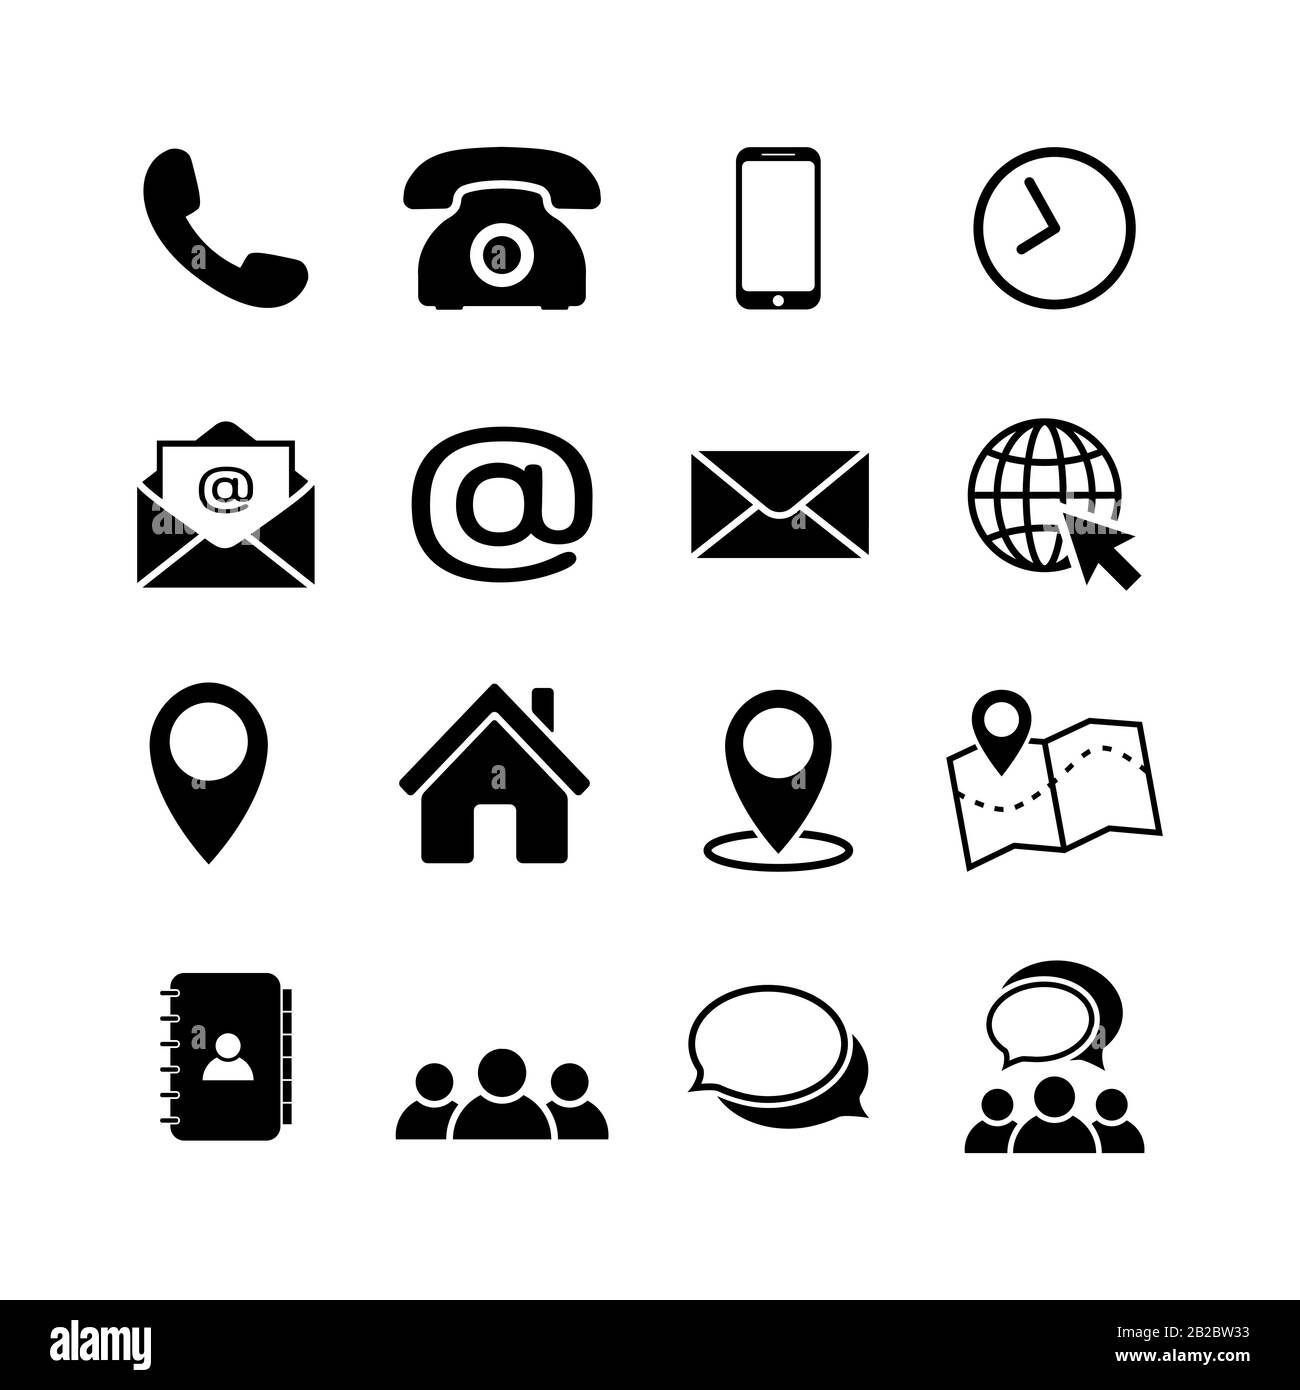 Contact us icon set in flat style Stock Vector